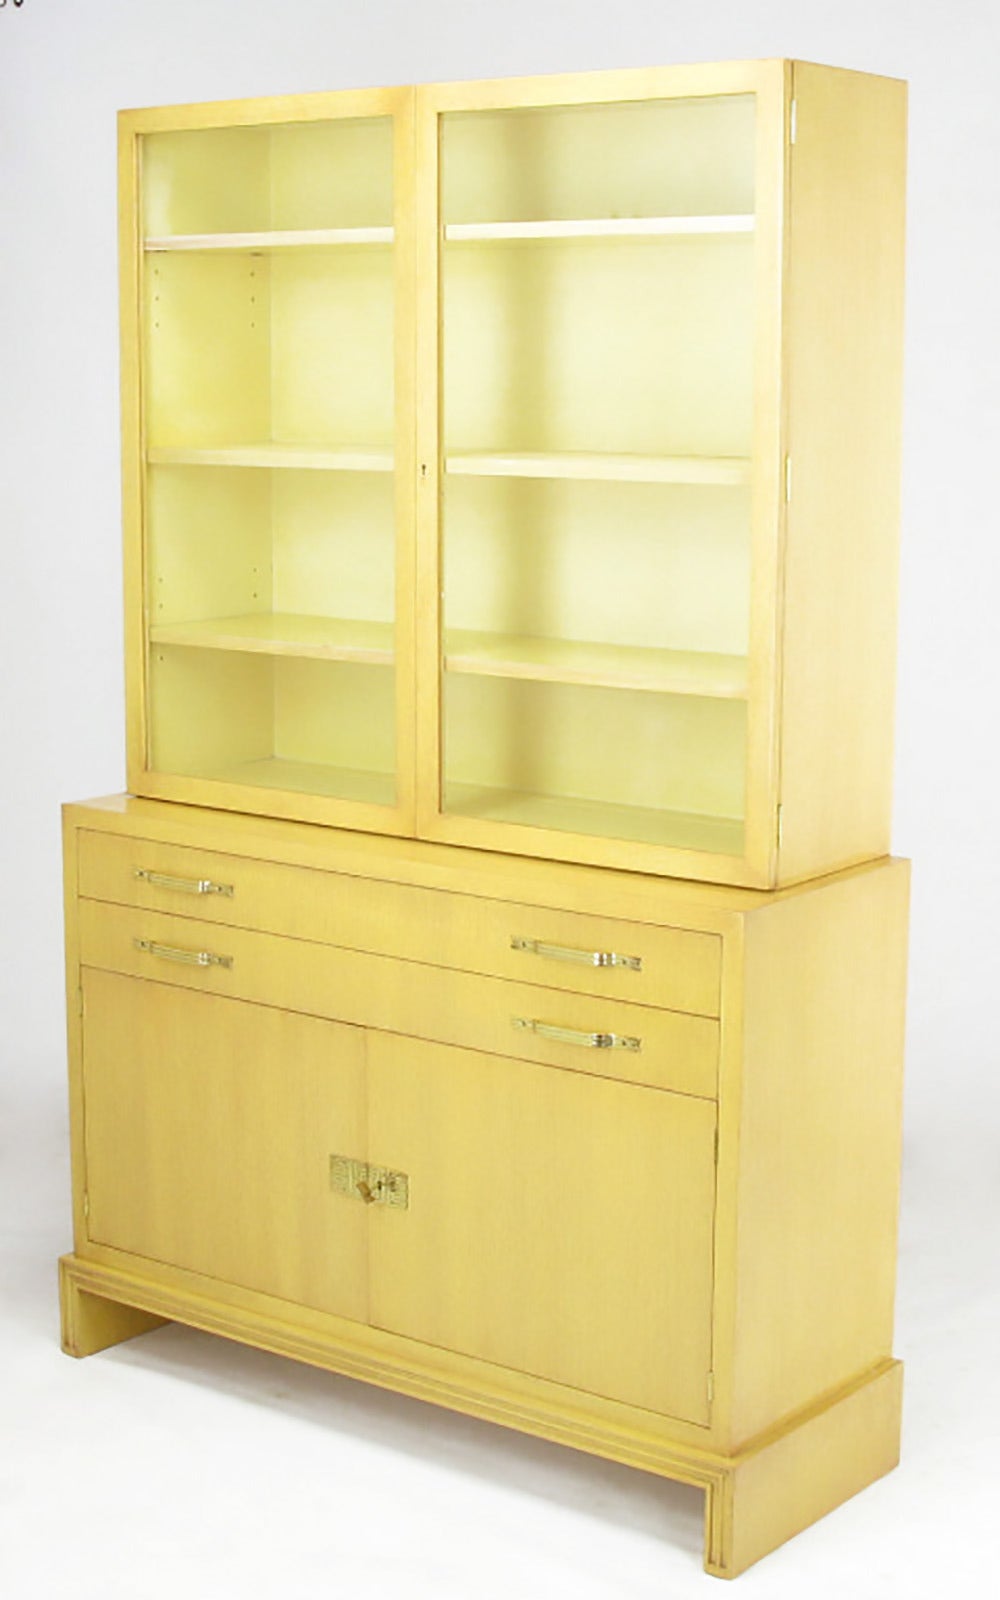 Restored two-piece China or display cabinet by Tommi Parzinger for Charak Modern. Bleached mahogany wood is finished in light saffron with a contrasting grain fill and glaze as was dictated by the original untouched finish behind the two cabinet